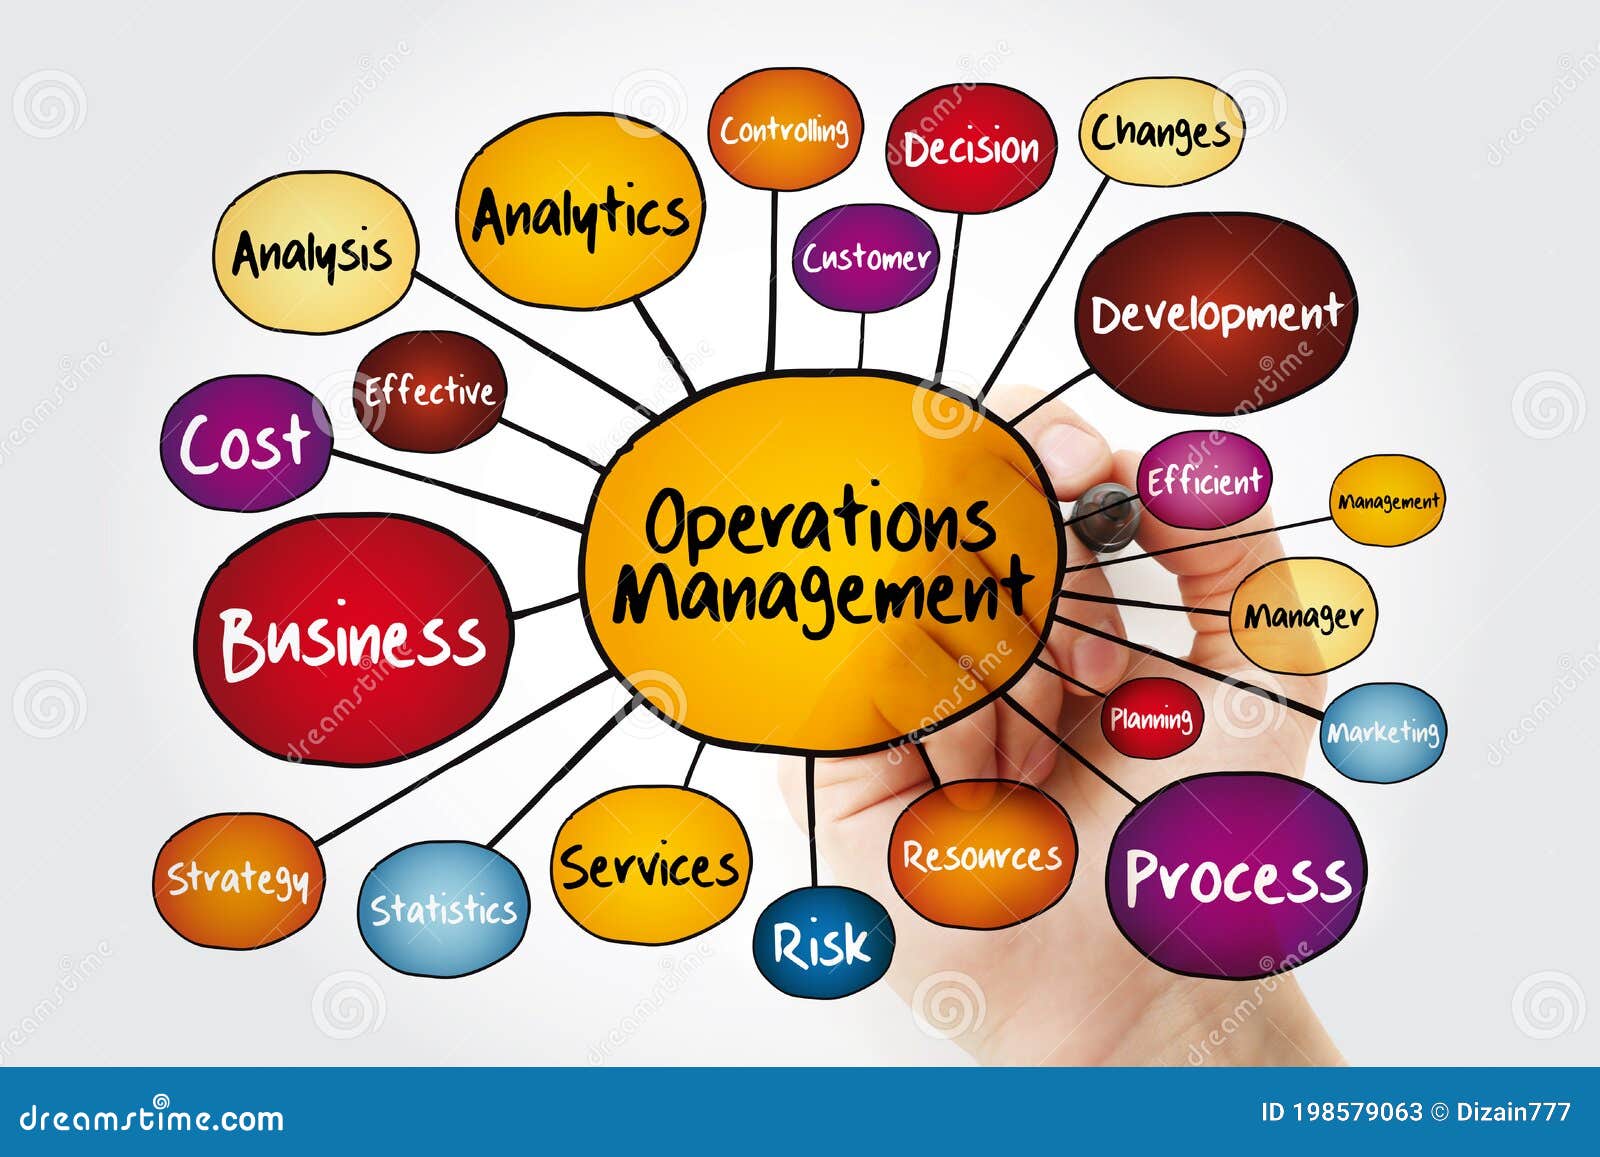 operations management controls the implementation of the business plan